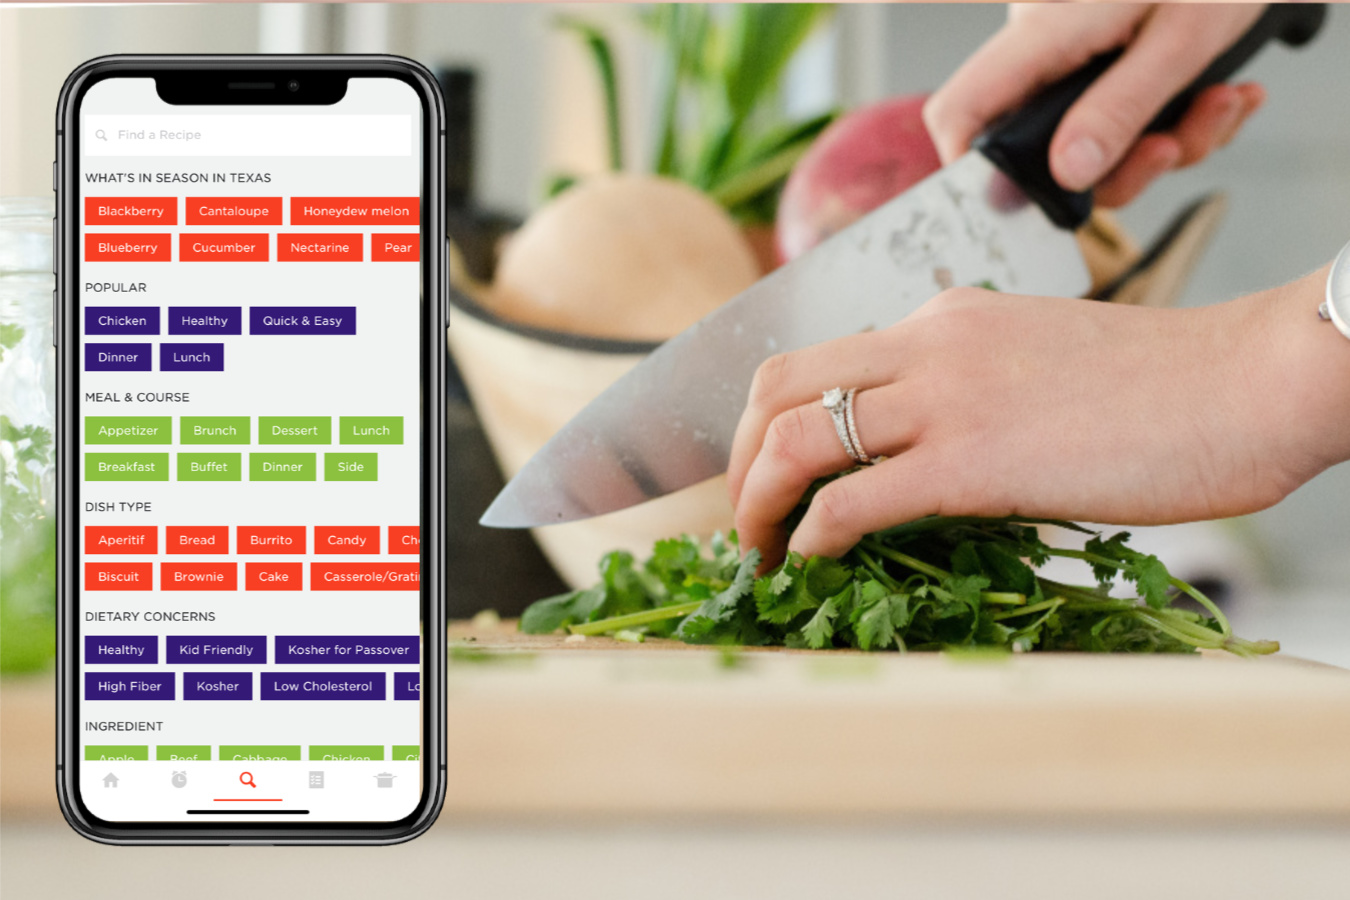 Here are 6 fantastic recipe apps that let you search by ingredient